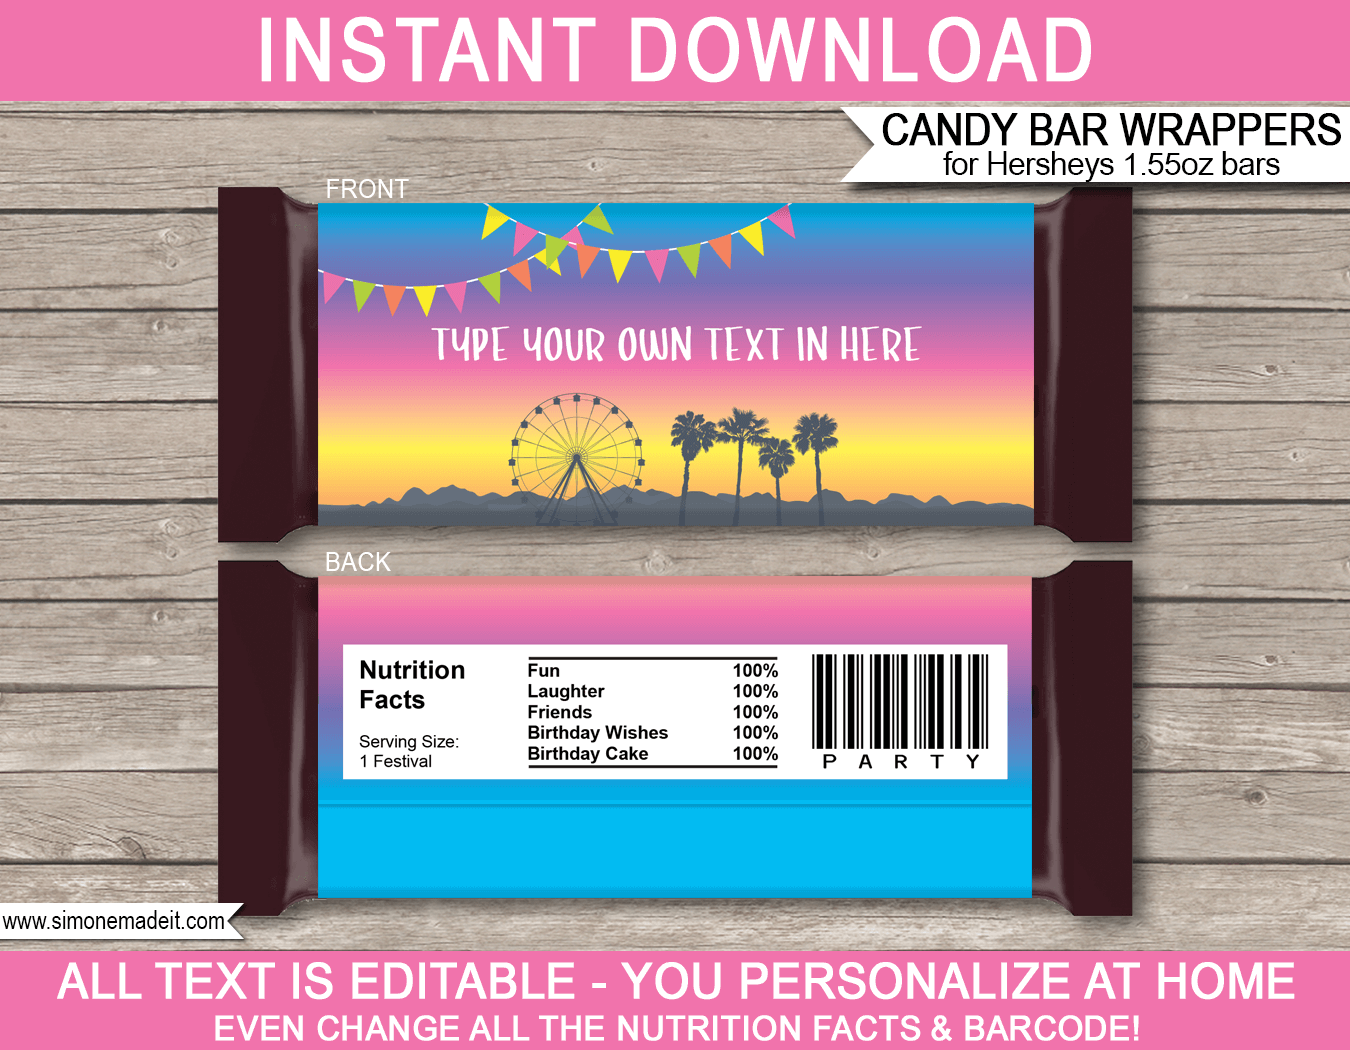 Printable Coachella Hershey Candy Bar Wrappers | Festival Inspired Birthday Party Favors | Personalized Hershey Candy Bars | music festival, gala, fete, fair, carnival | Editable Template | INSTANT DOWNLOAD via simonemadeit.com